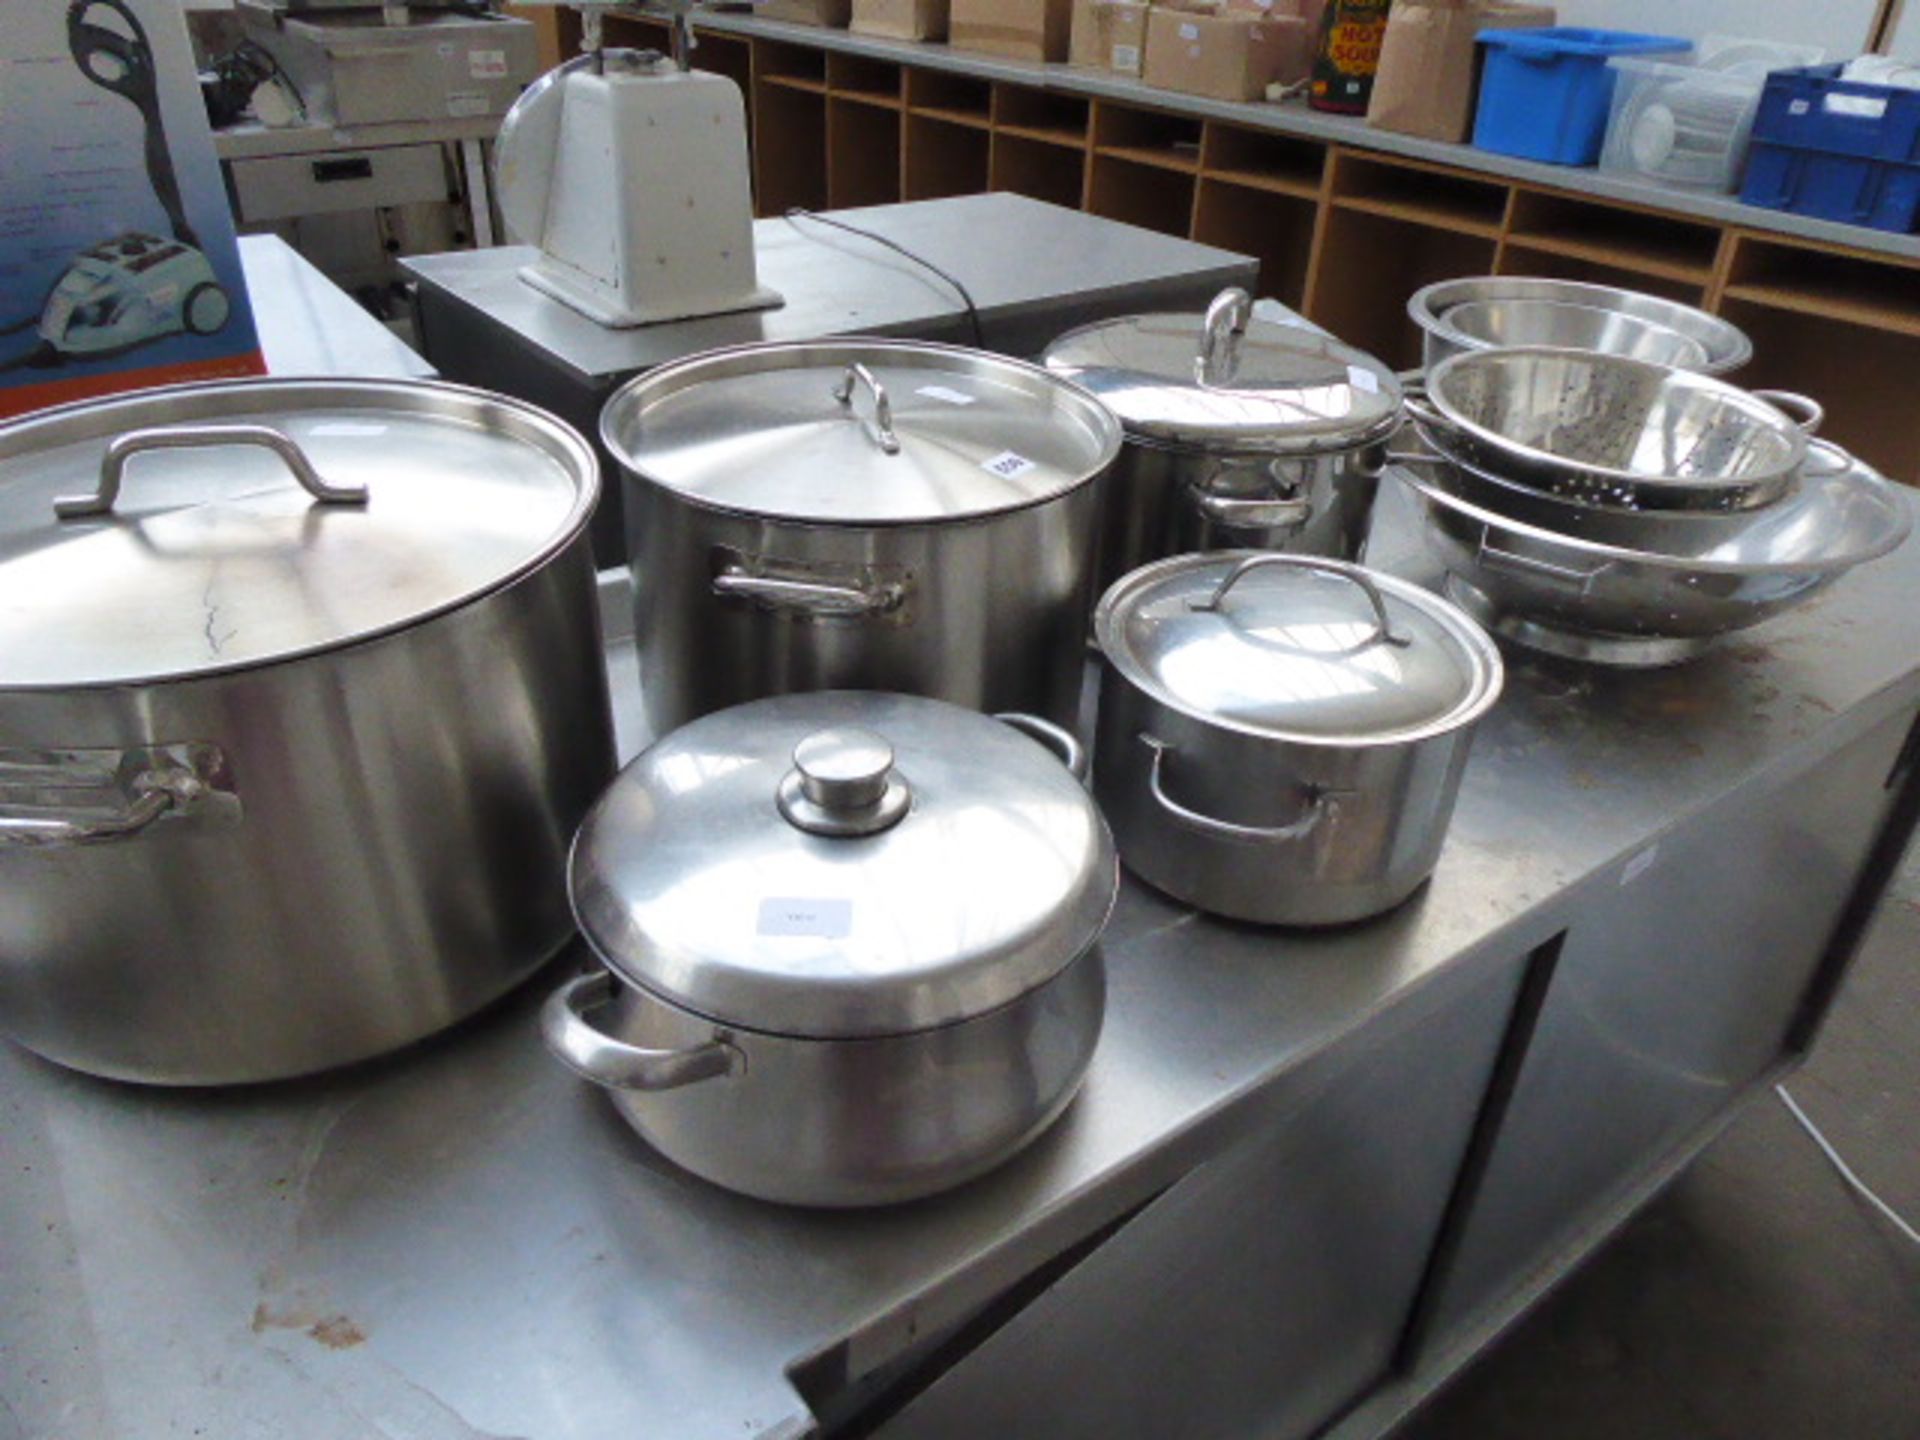 5 large stock pots with 2 handles and lids, and collection of colanders and mixing bowls